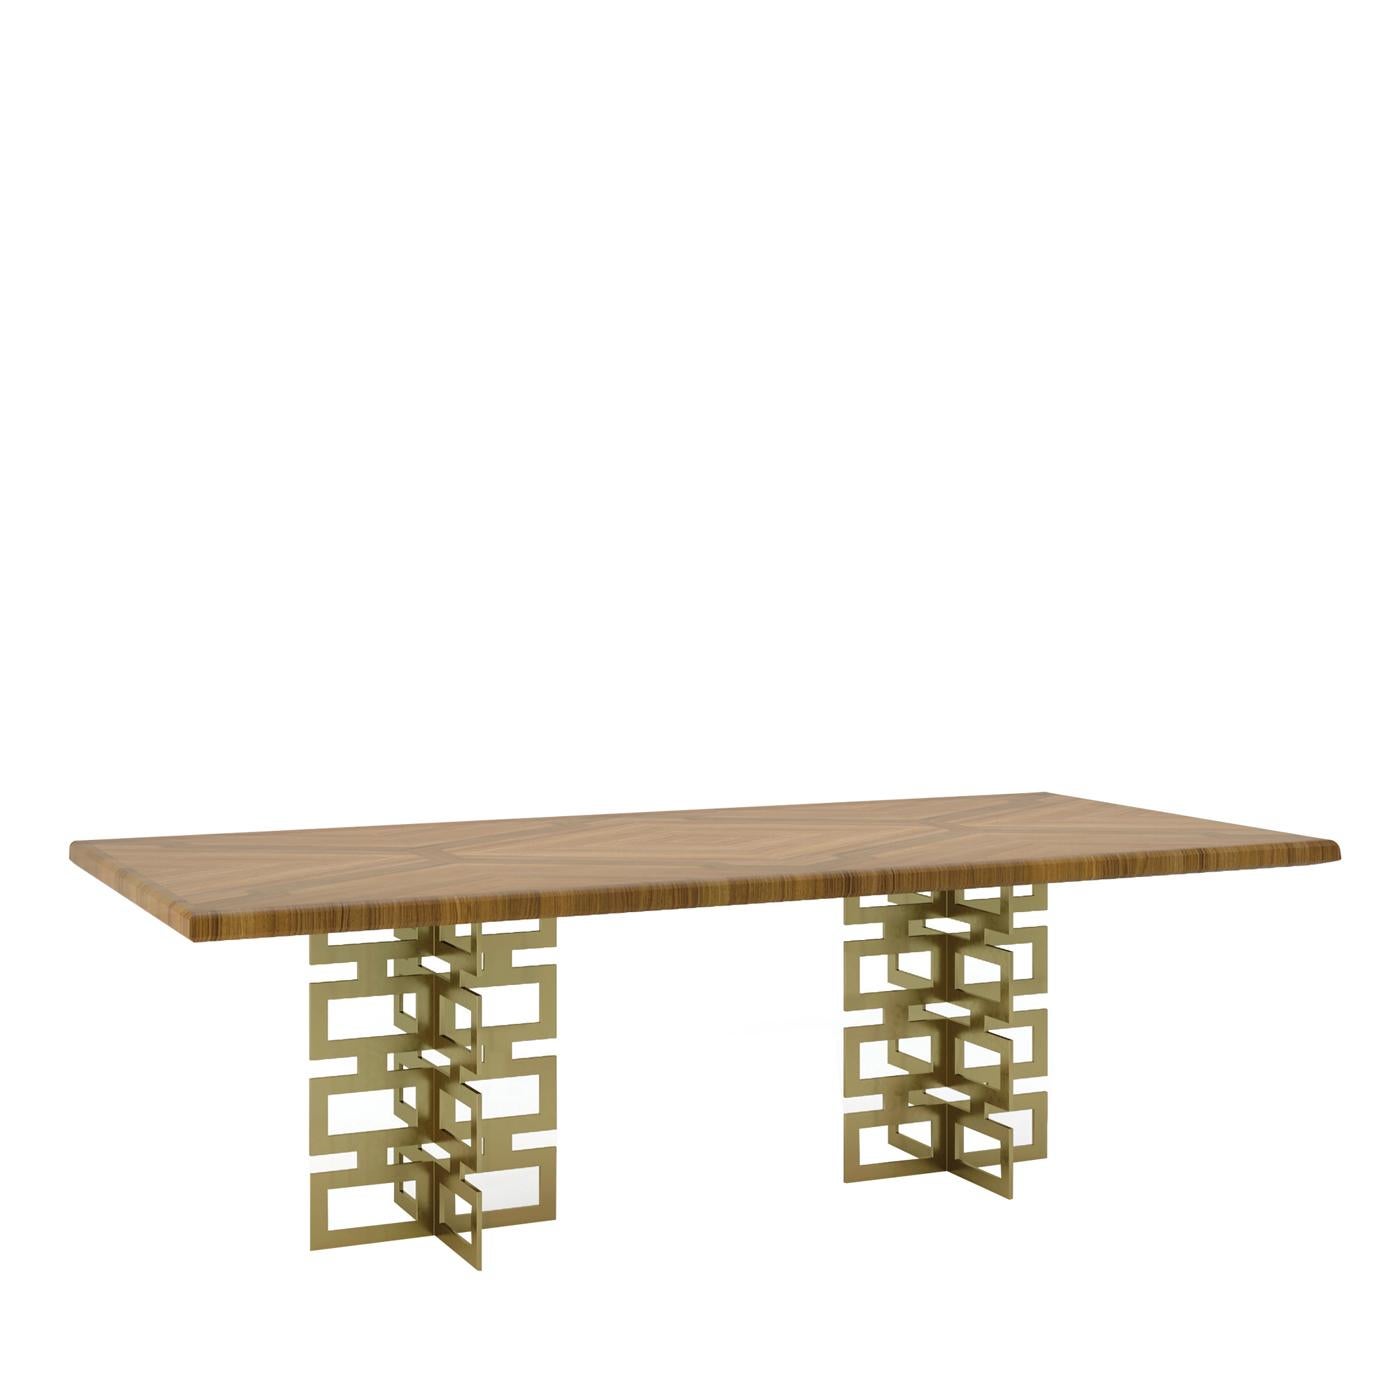 Italian Hollywood Dining Table by Giannella Ventura